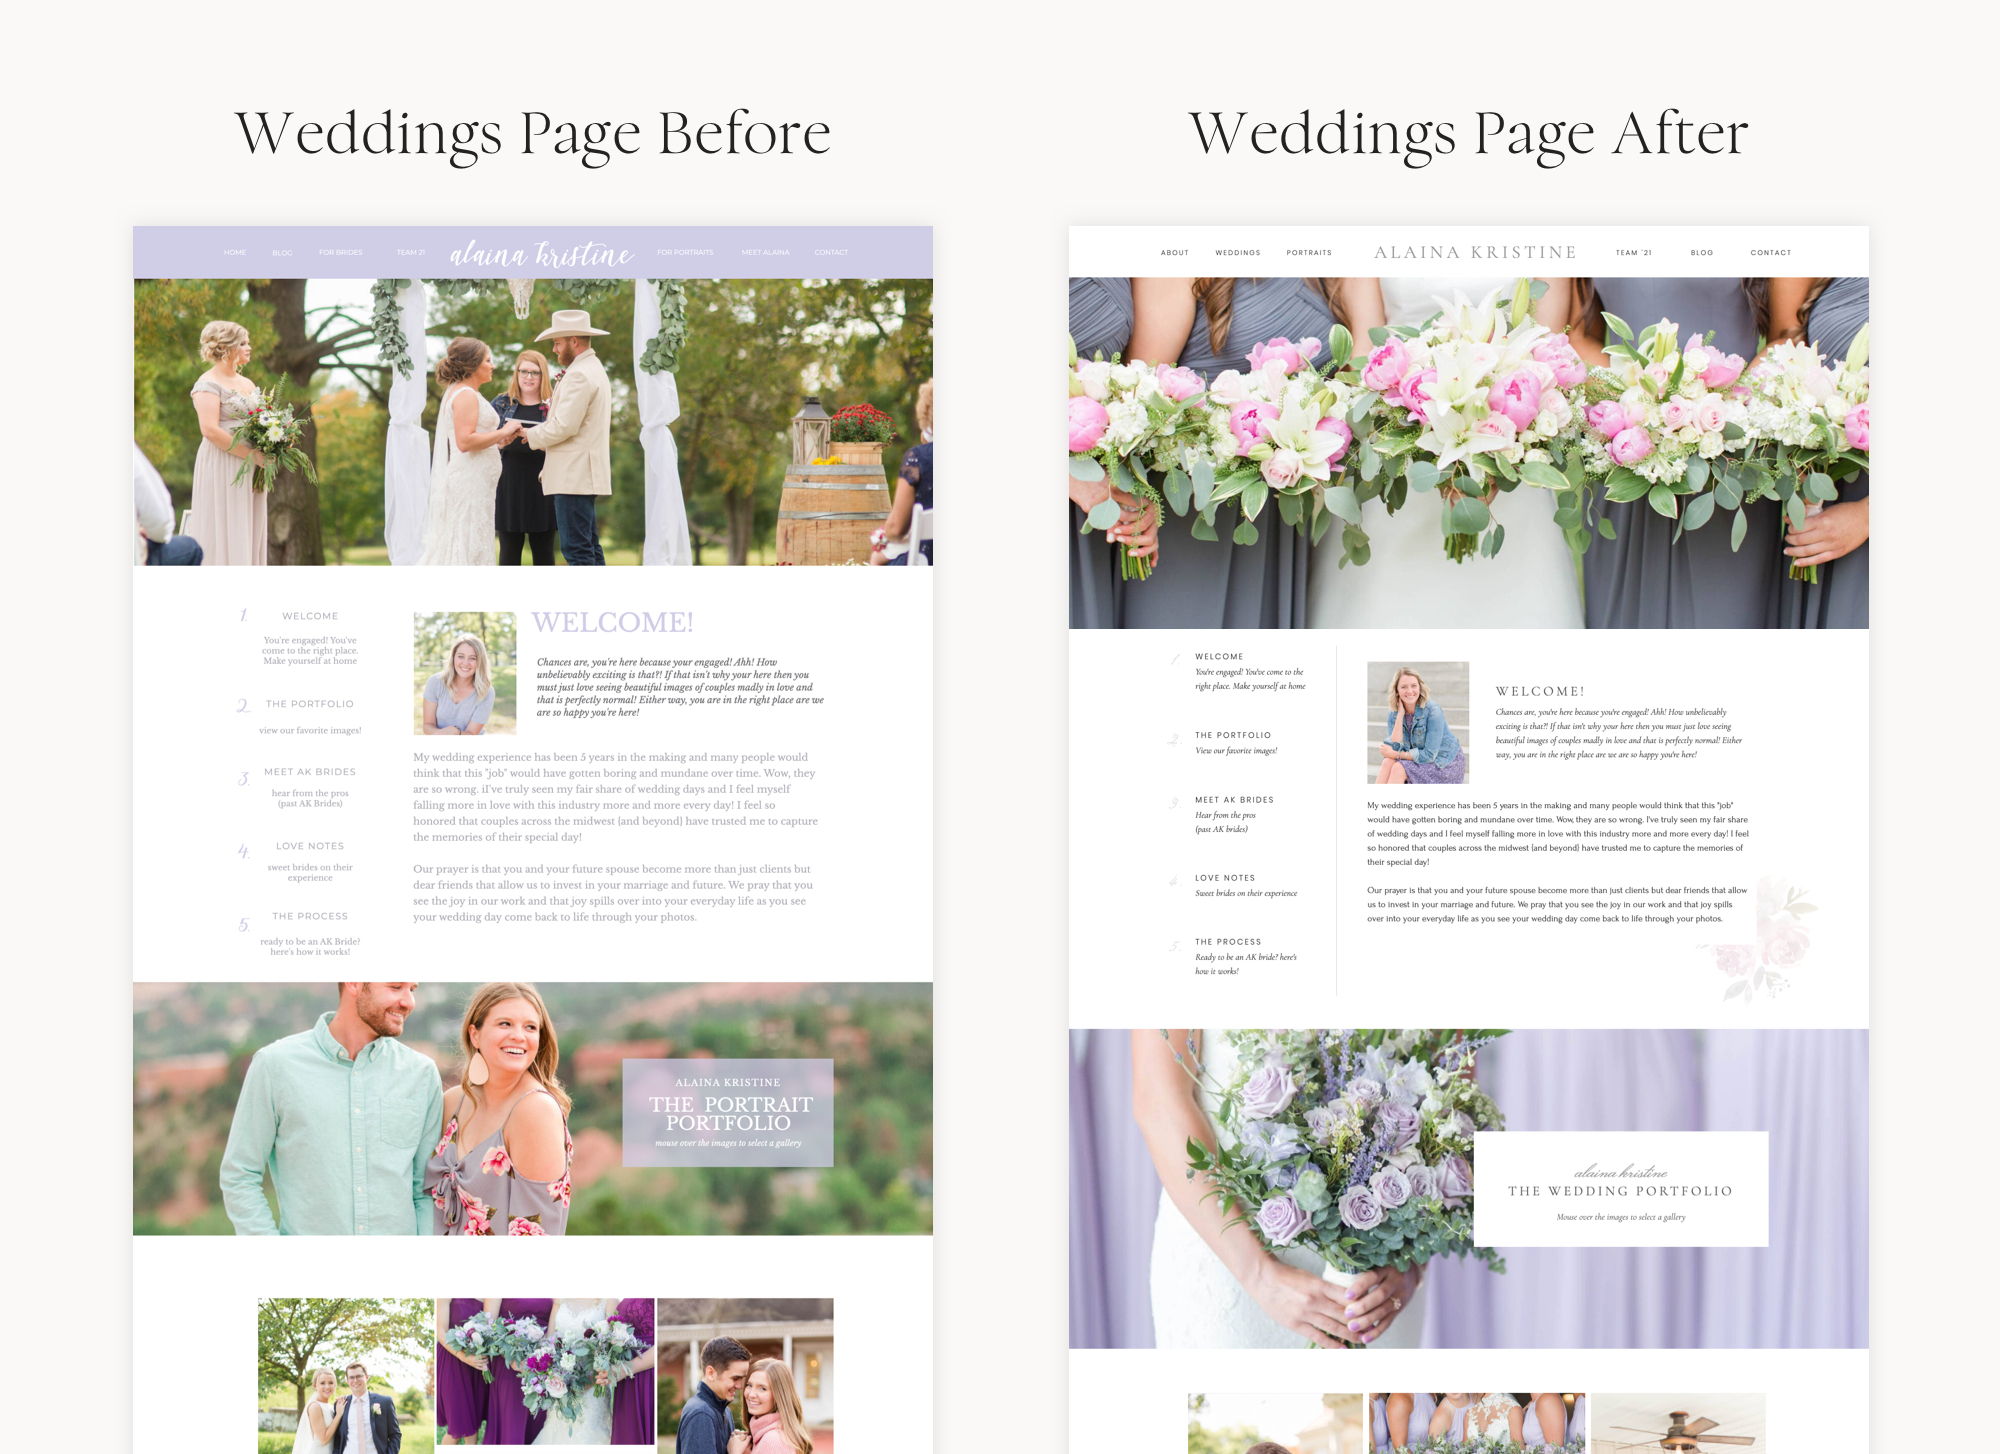 Weddings page before and after